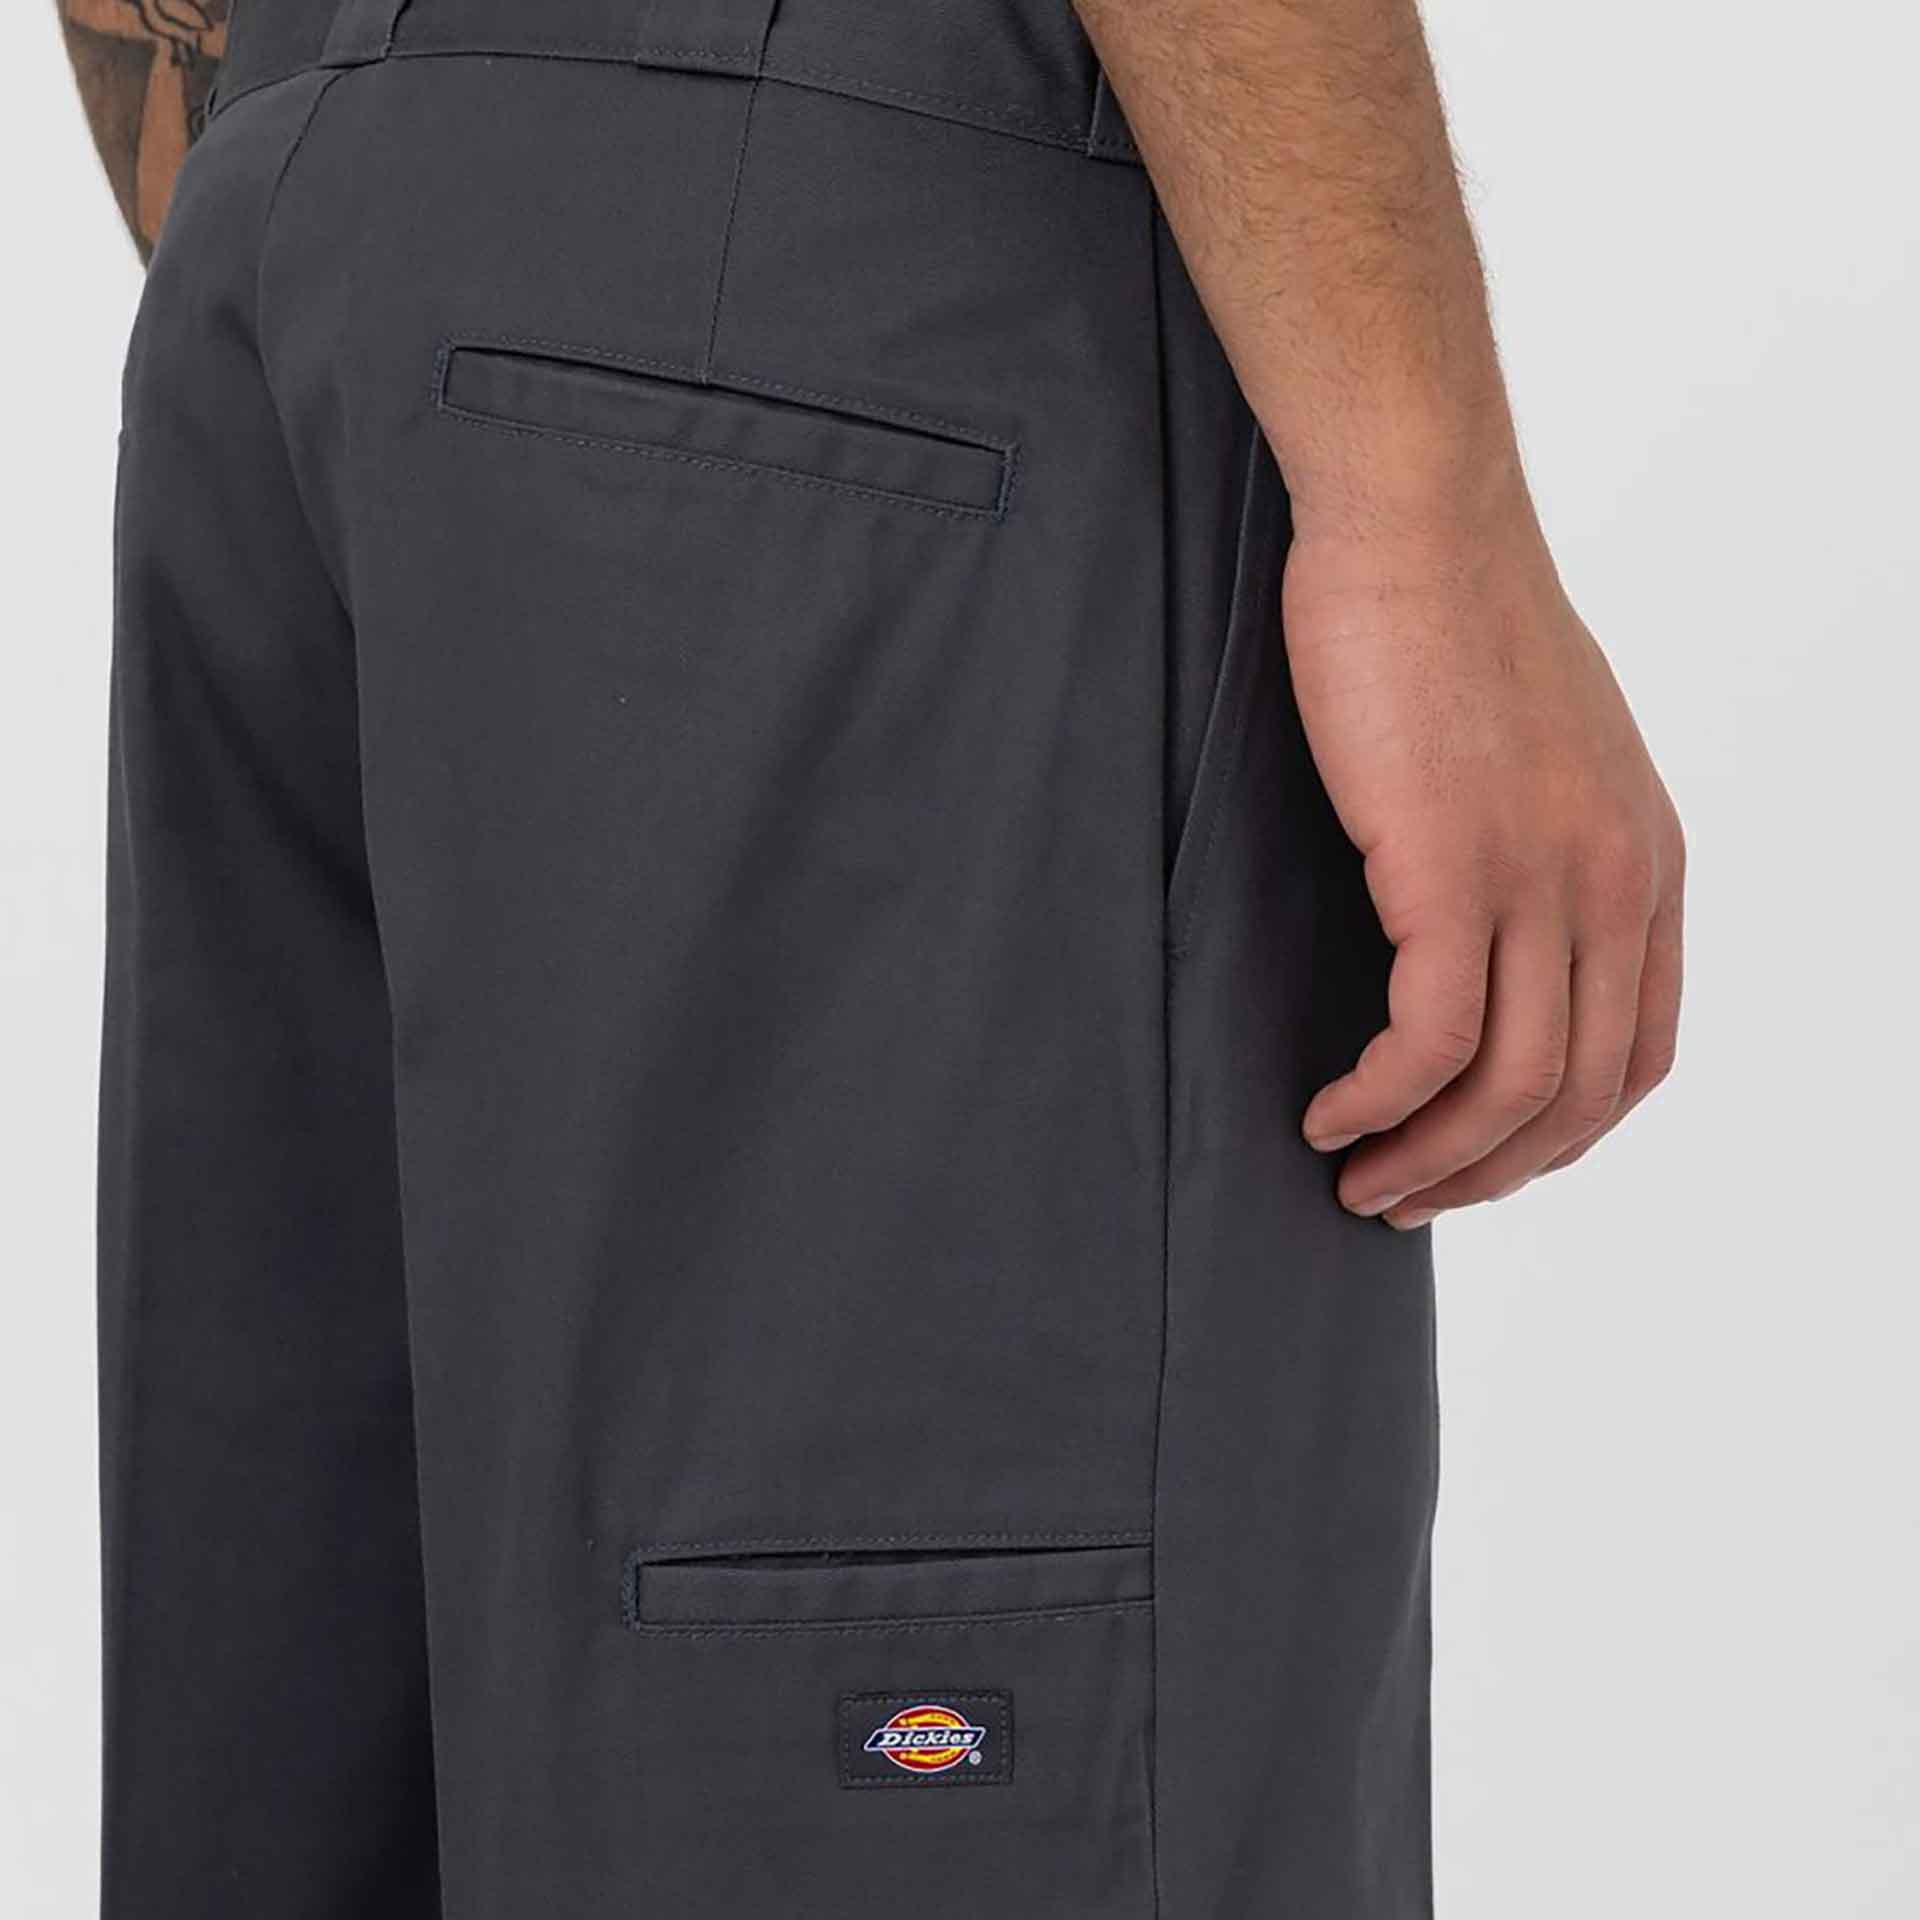 Dickies Double Knee Recycled Chino Pant Charcoal Grey